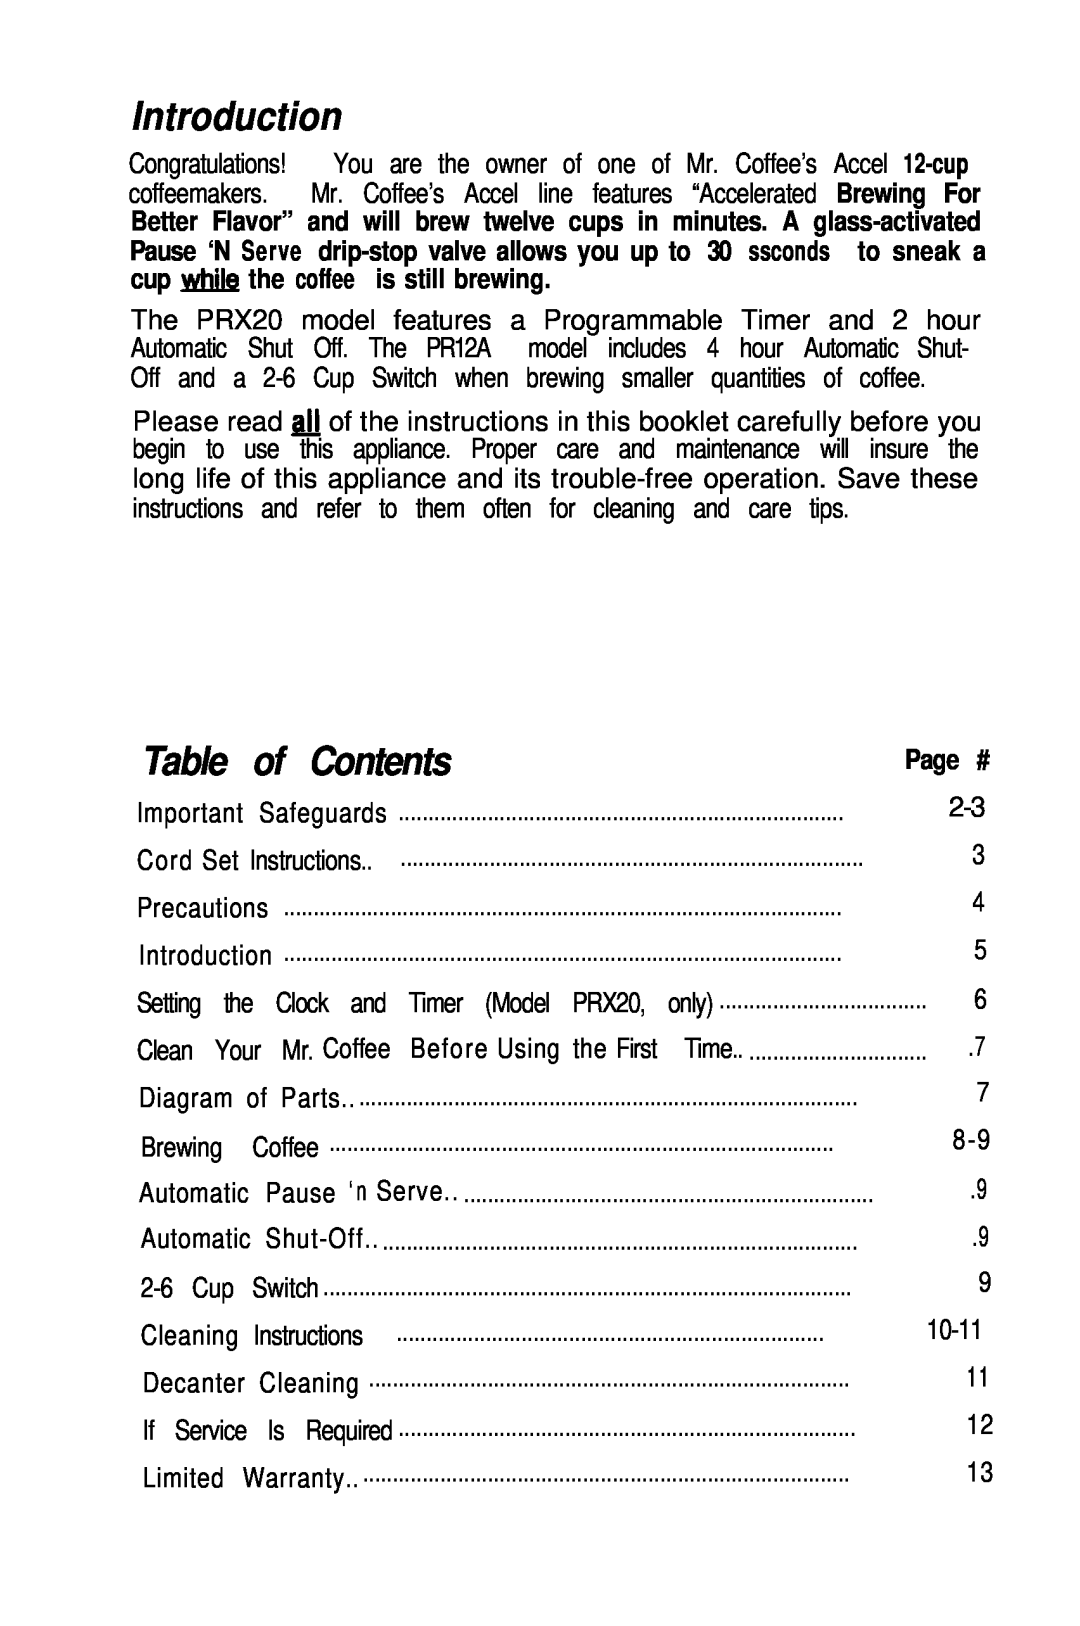 Mr. Coffee PRX20, PR12A operating instructions Introduction, Contents 